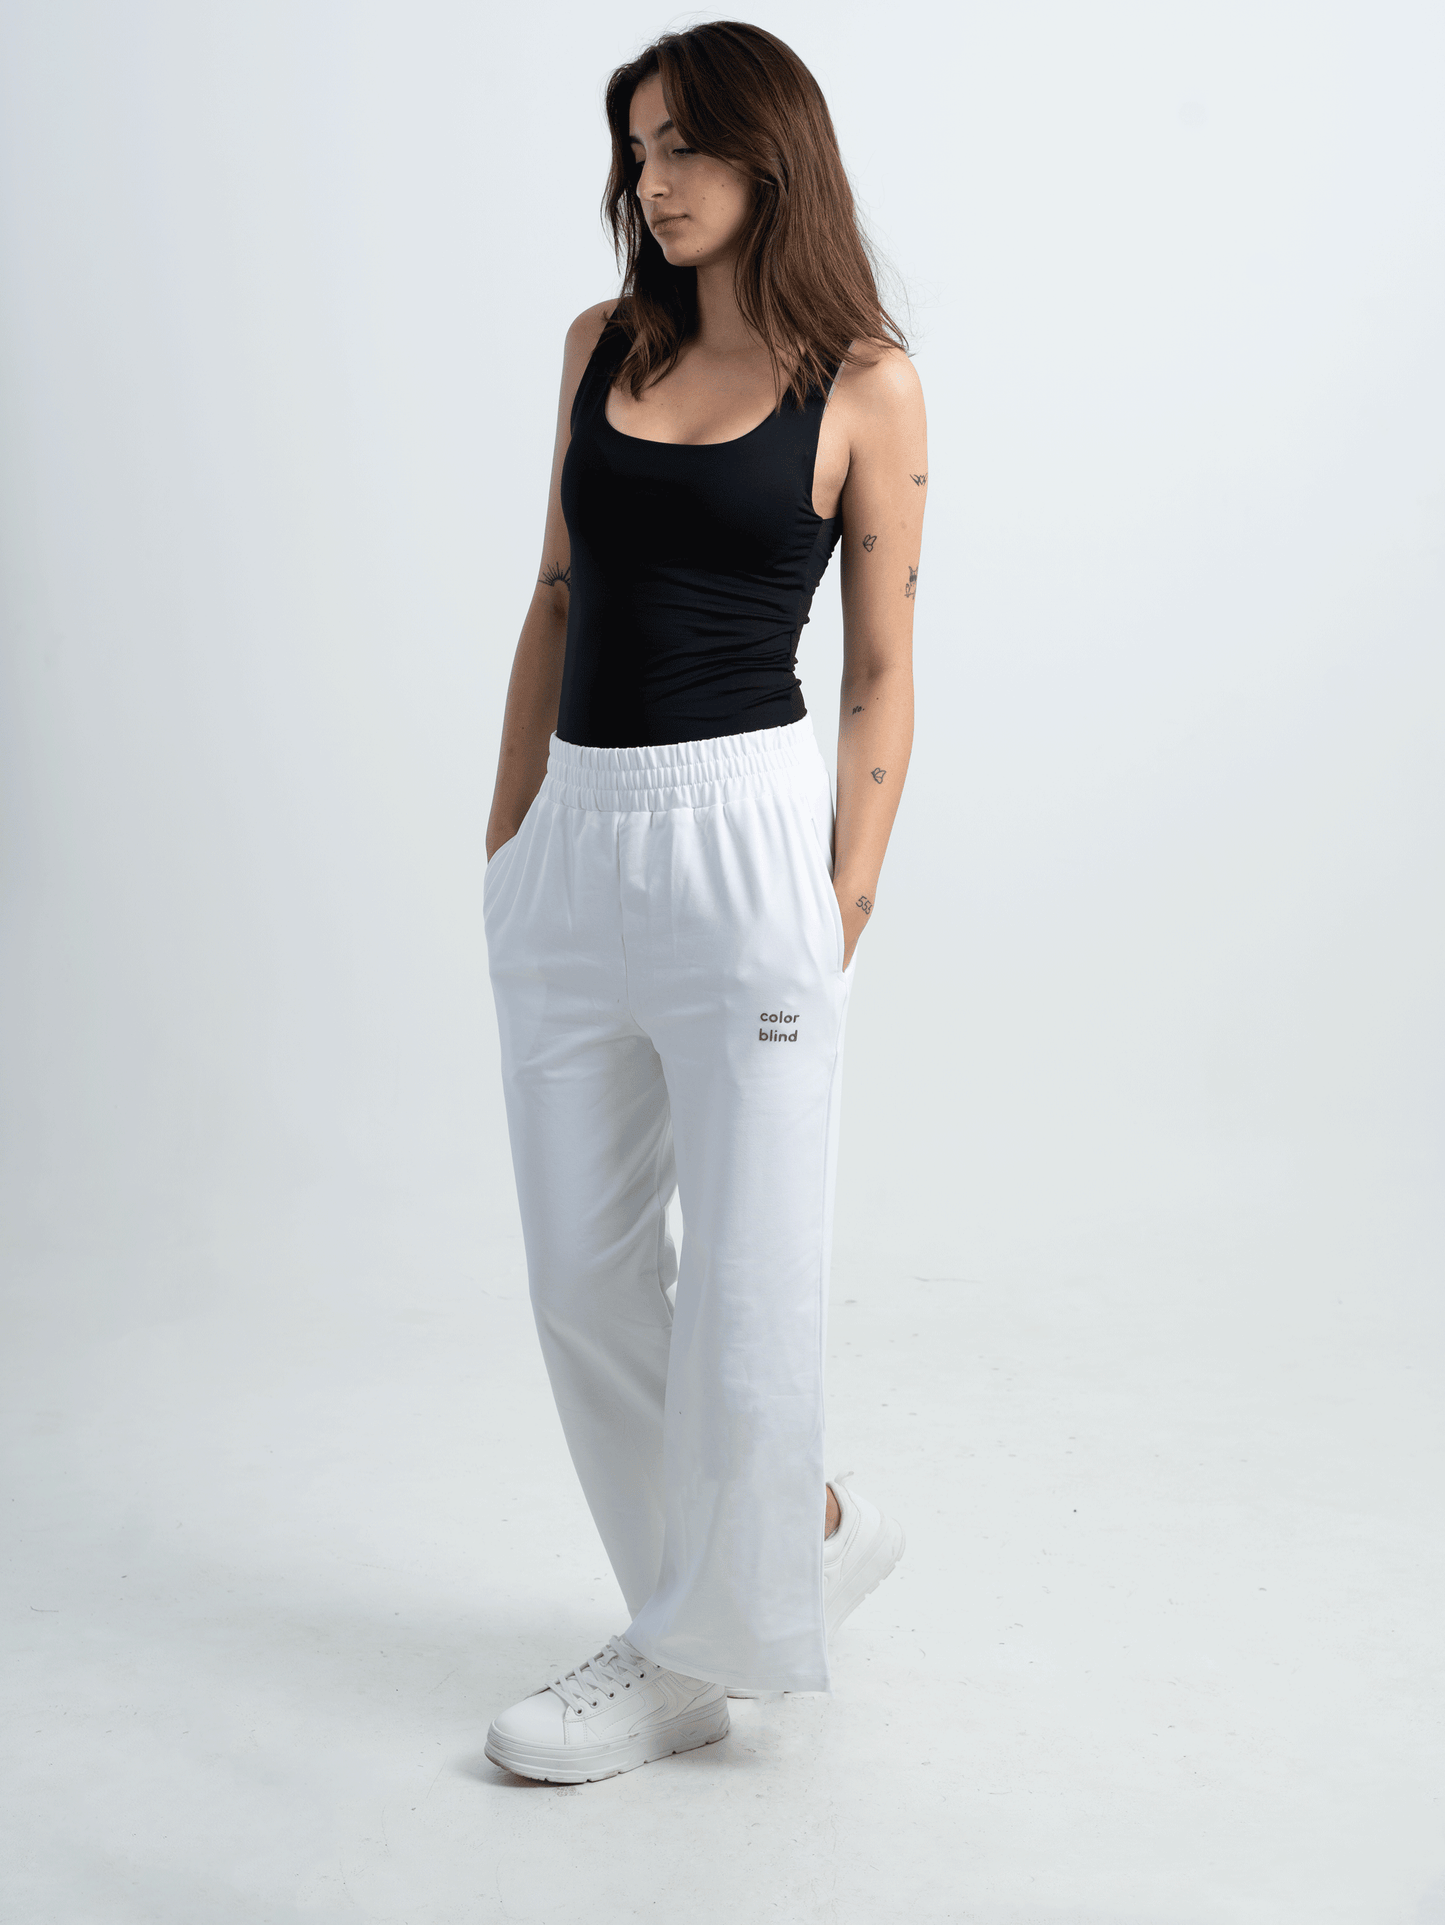 POLAR WHITE WOMEN'S RELAXED FIT PANTS